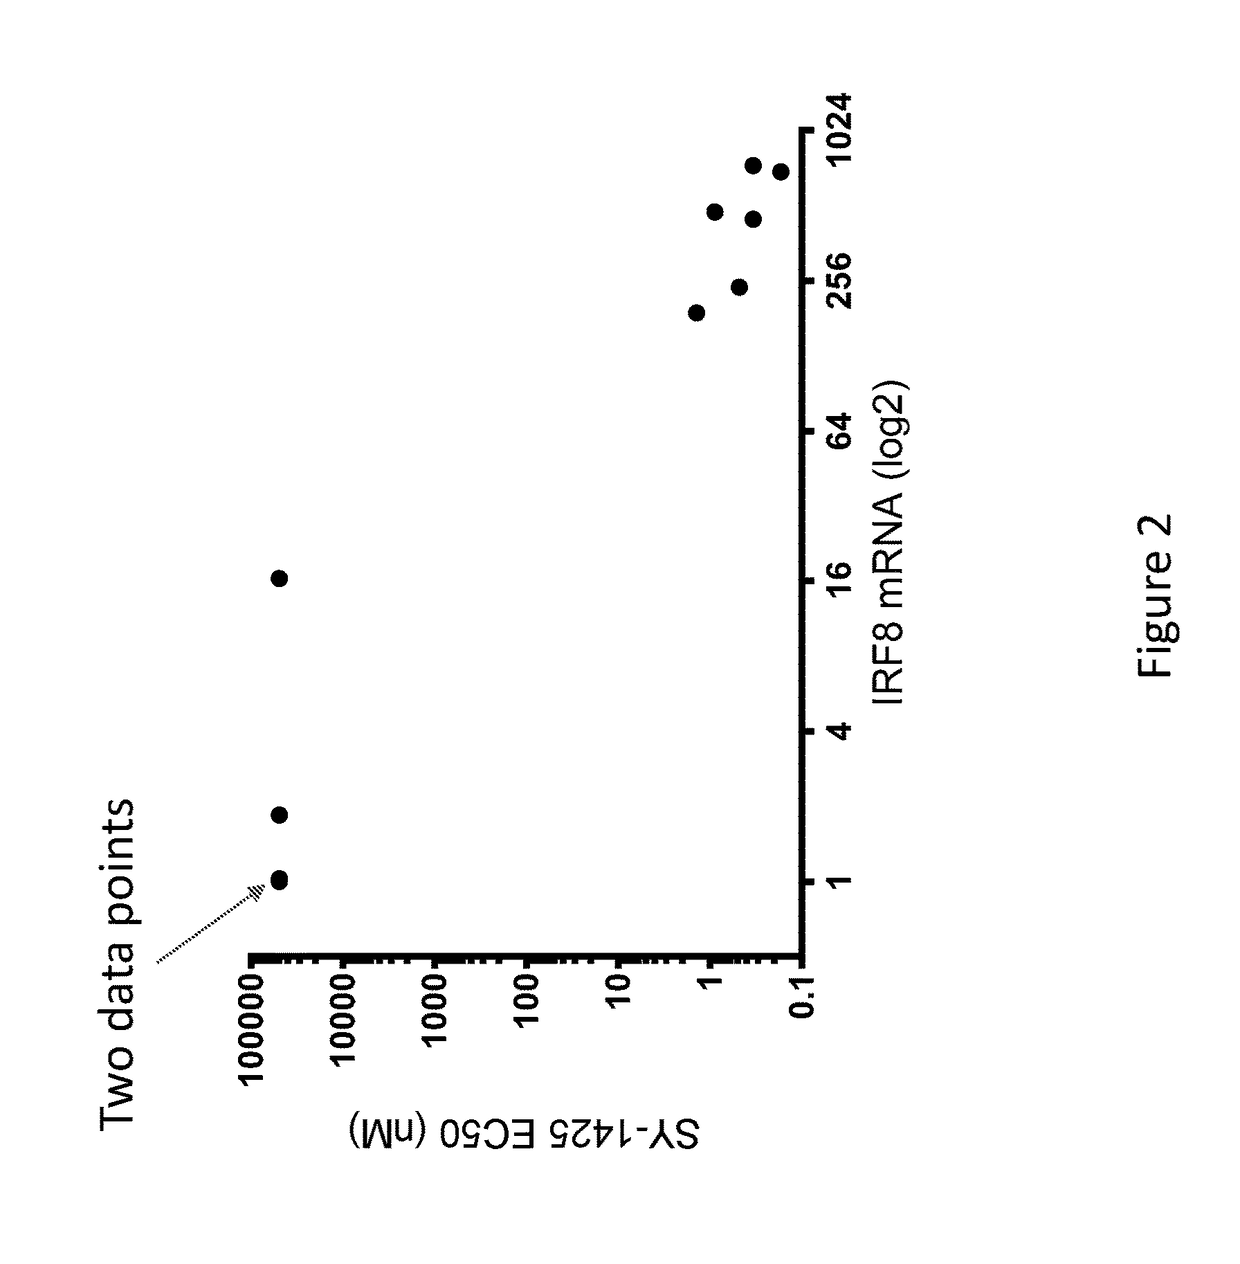 Methods of stratifying patients for treatment with retinoic acid receptor-α agonists